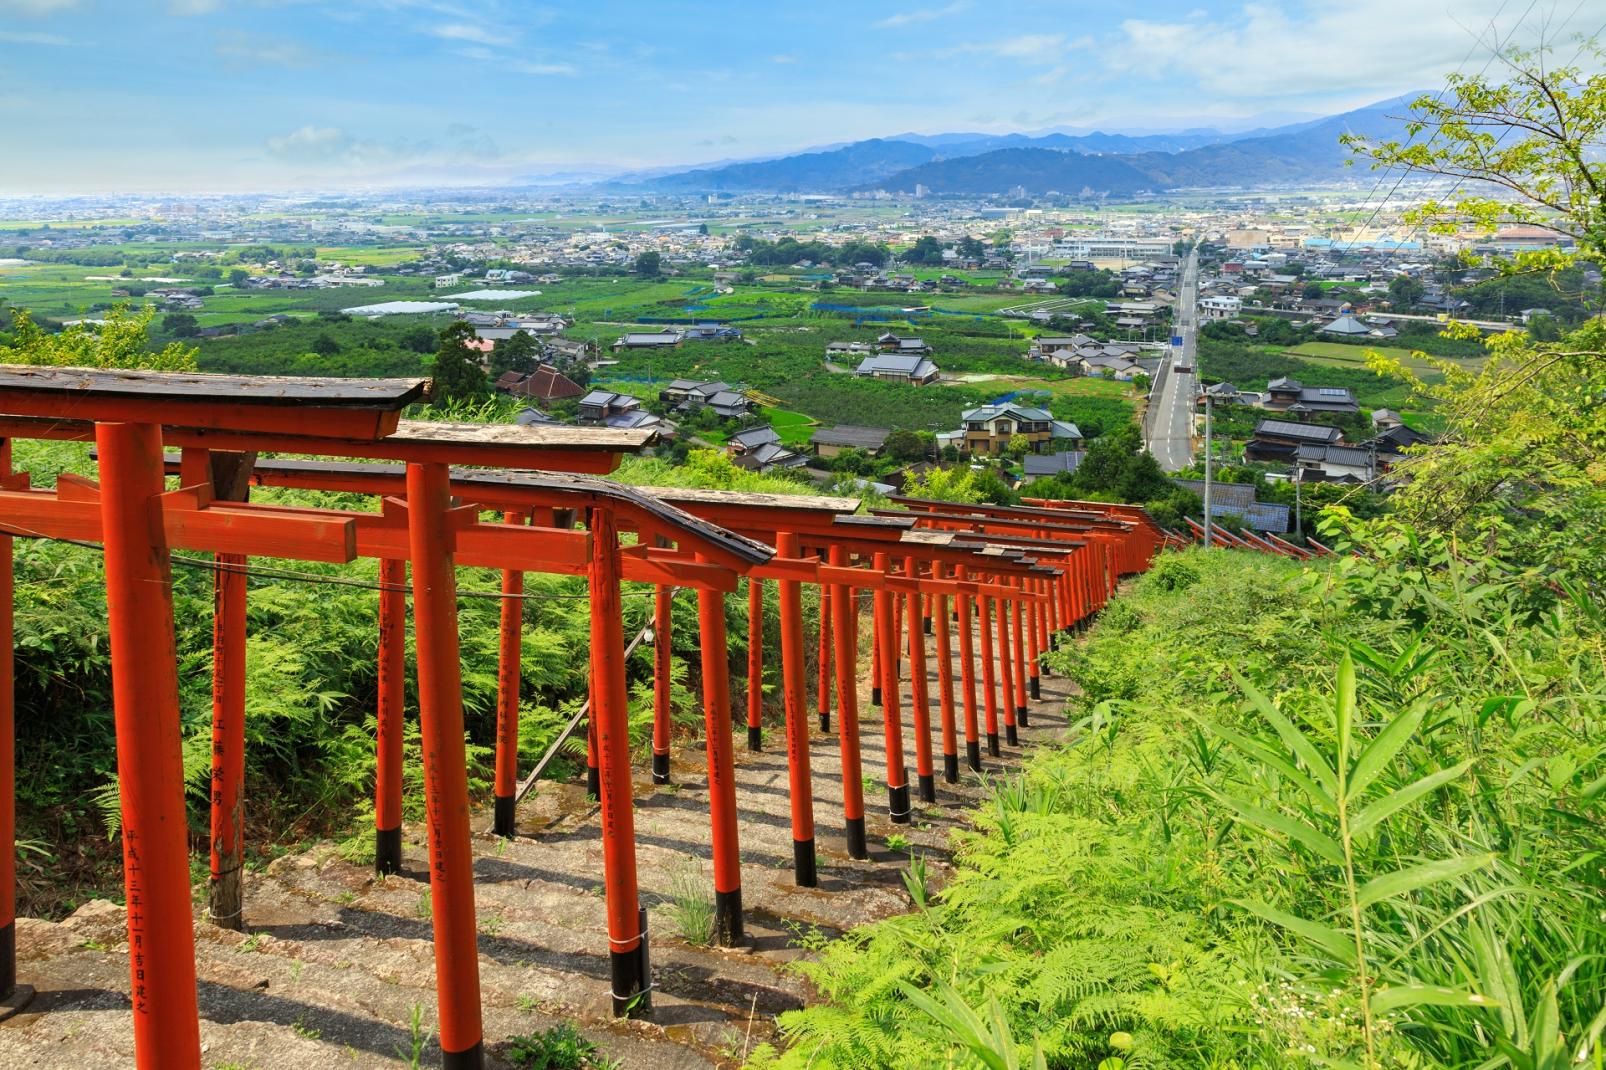 The extending torii gate and amazing view are something to see at Ukiha Inari Shrine